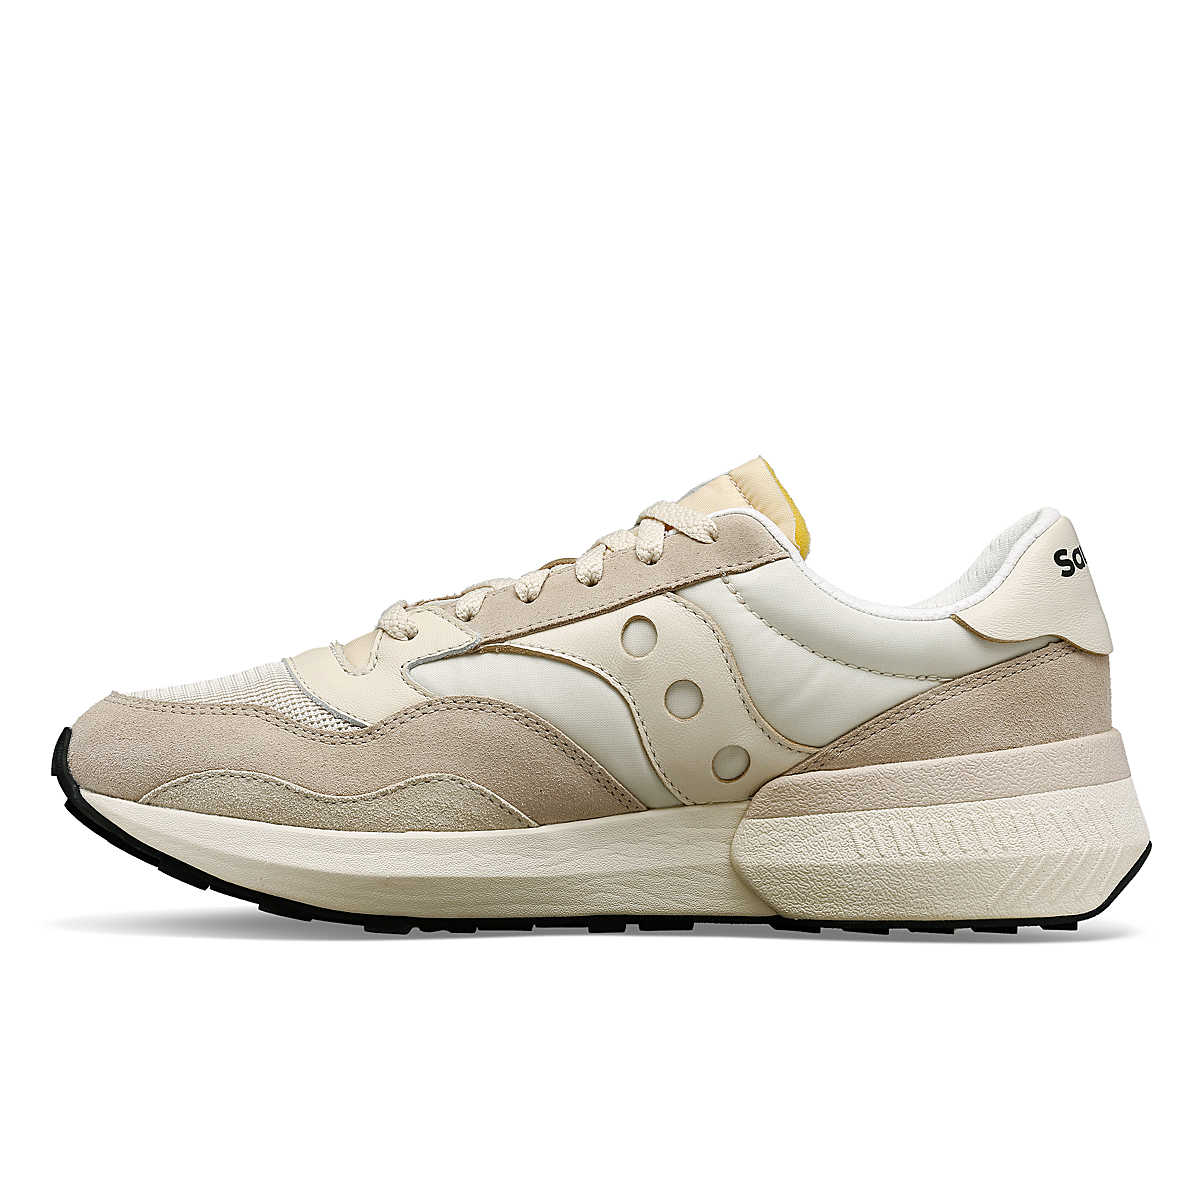 Saucony Womens Jazz NXT Trainers - Pale Pink / Cream